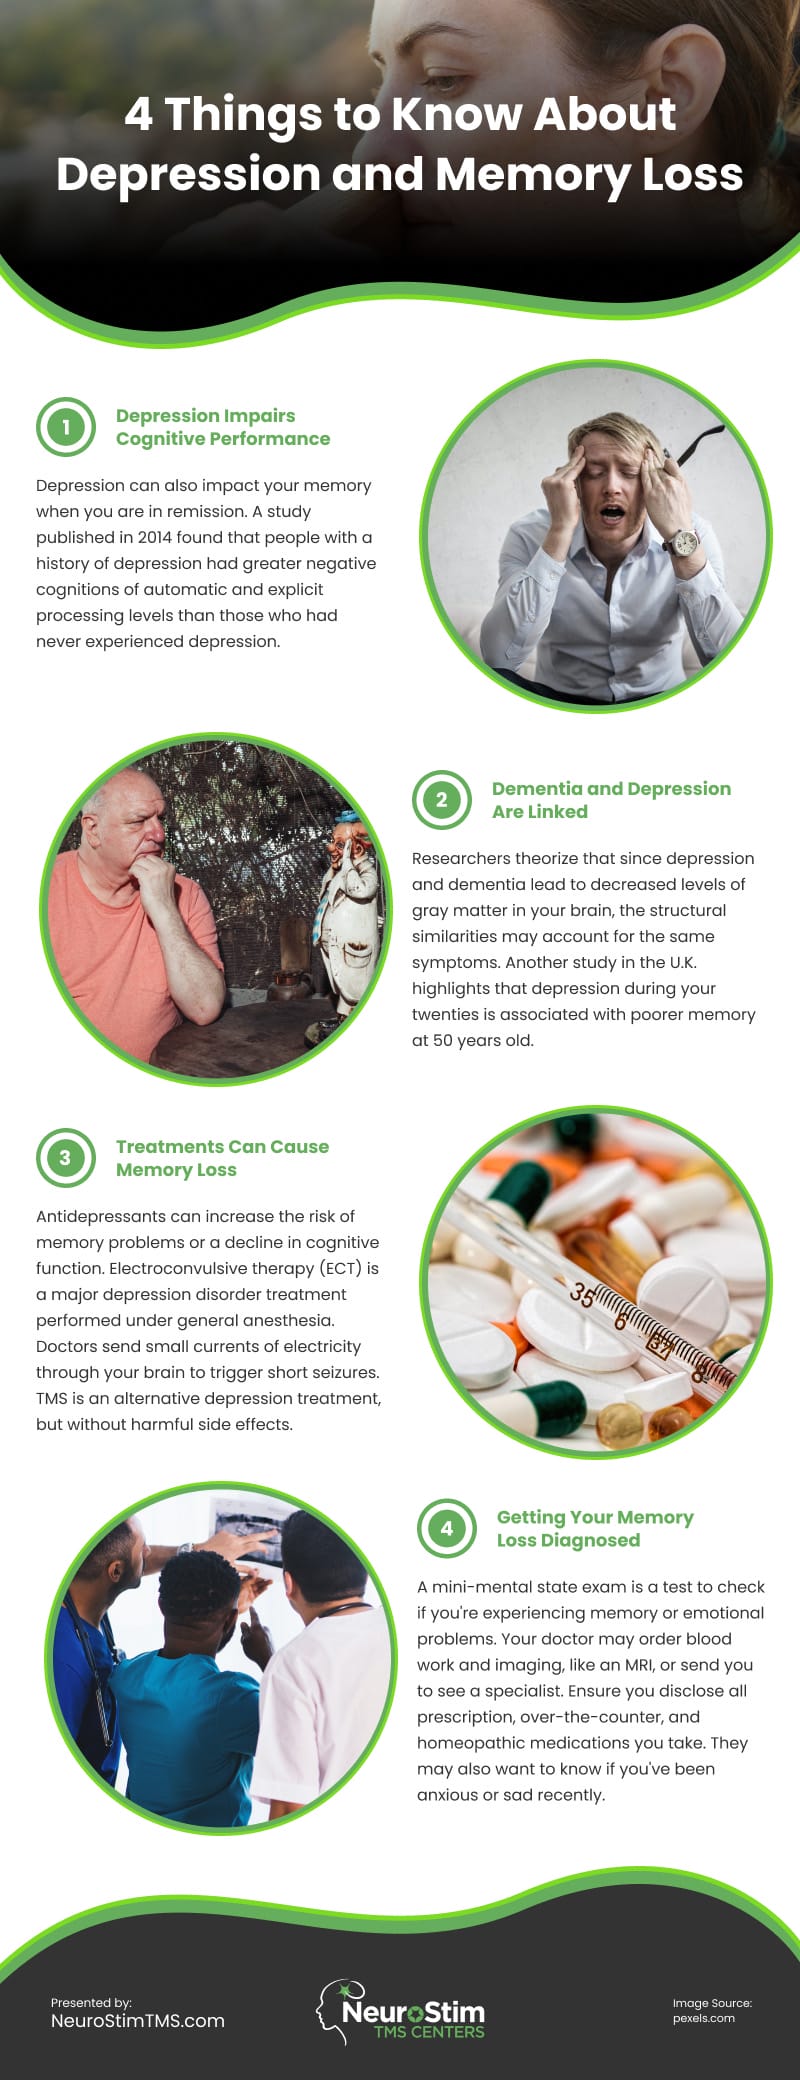 4 Things to Know About Depression and Memory Loss Infographic